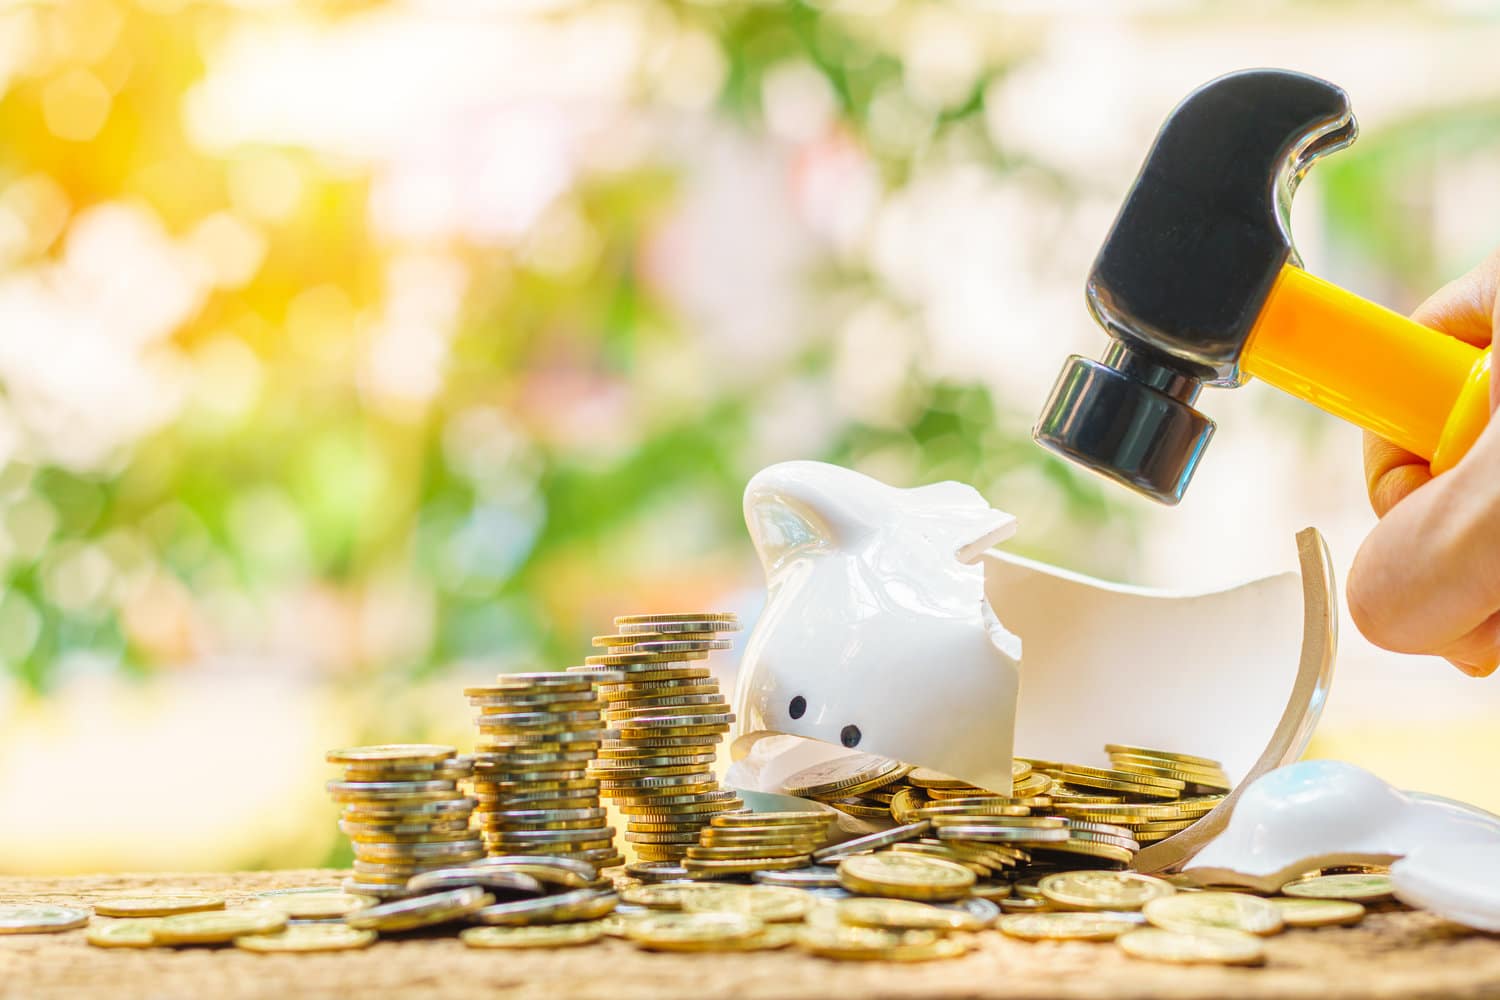 Regular savers earn more interest than stashing your emergency fund in a piggy bank